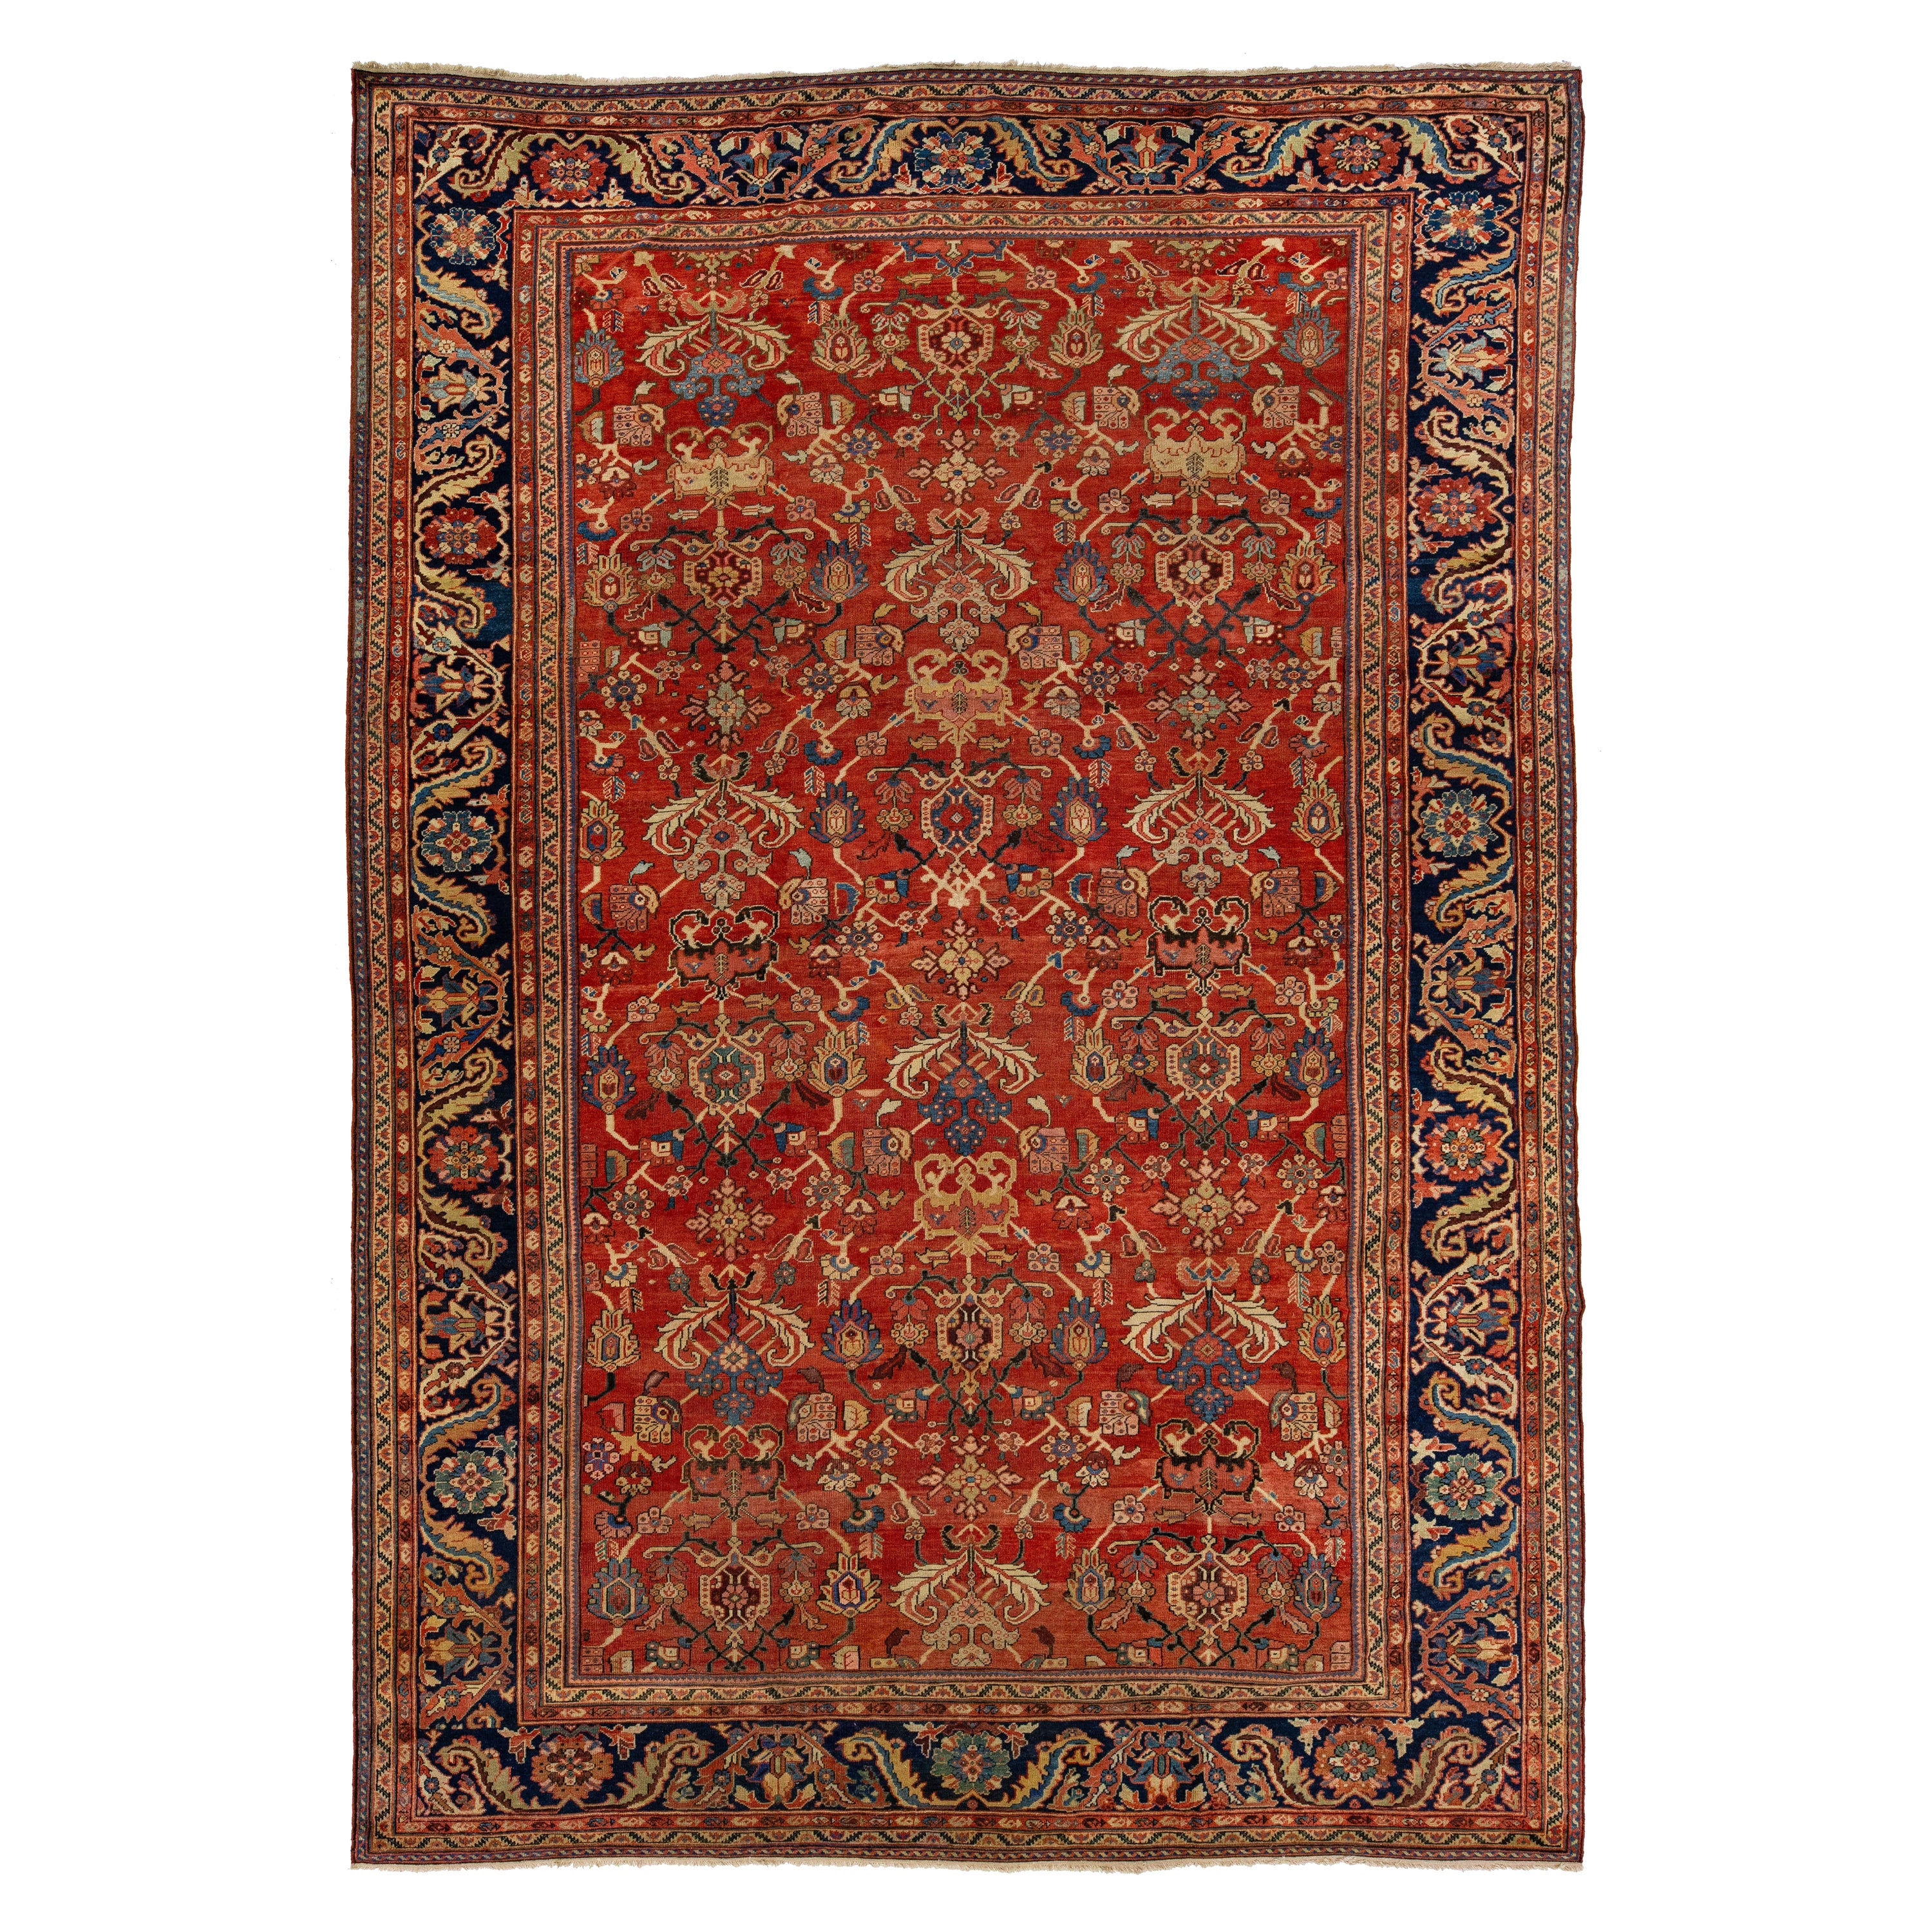 1880s Antique Floral Persian Sultanabad Wool Rug In Red For Sale